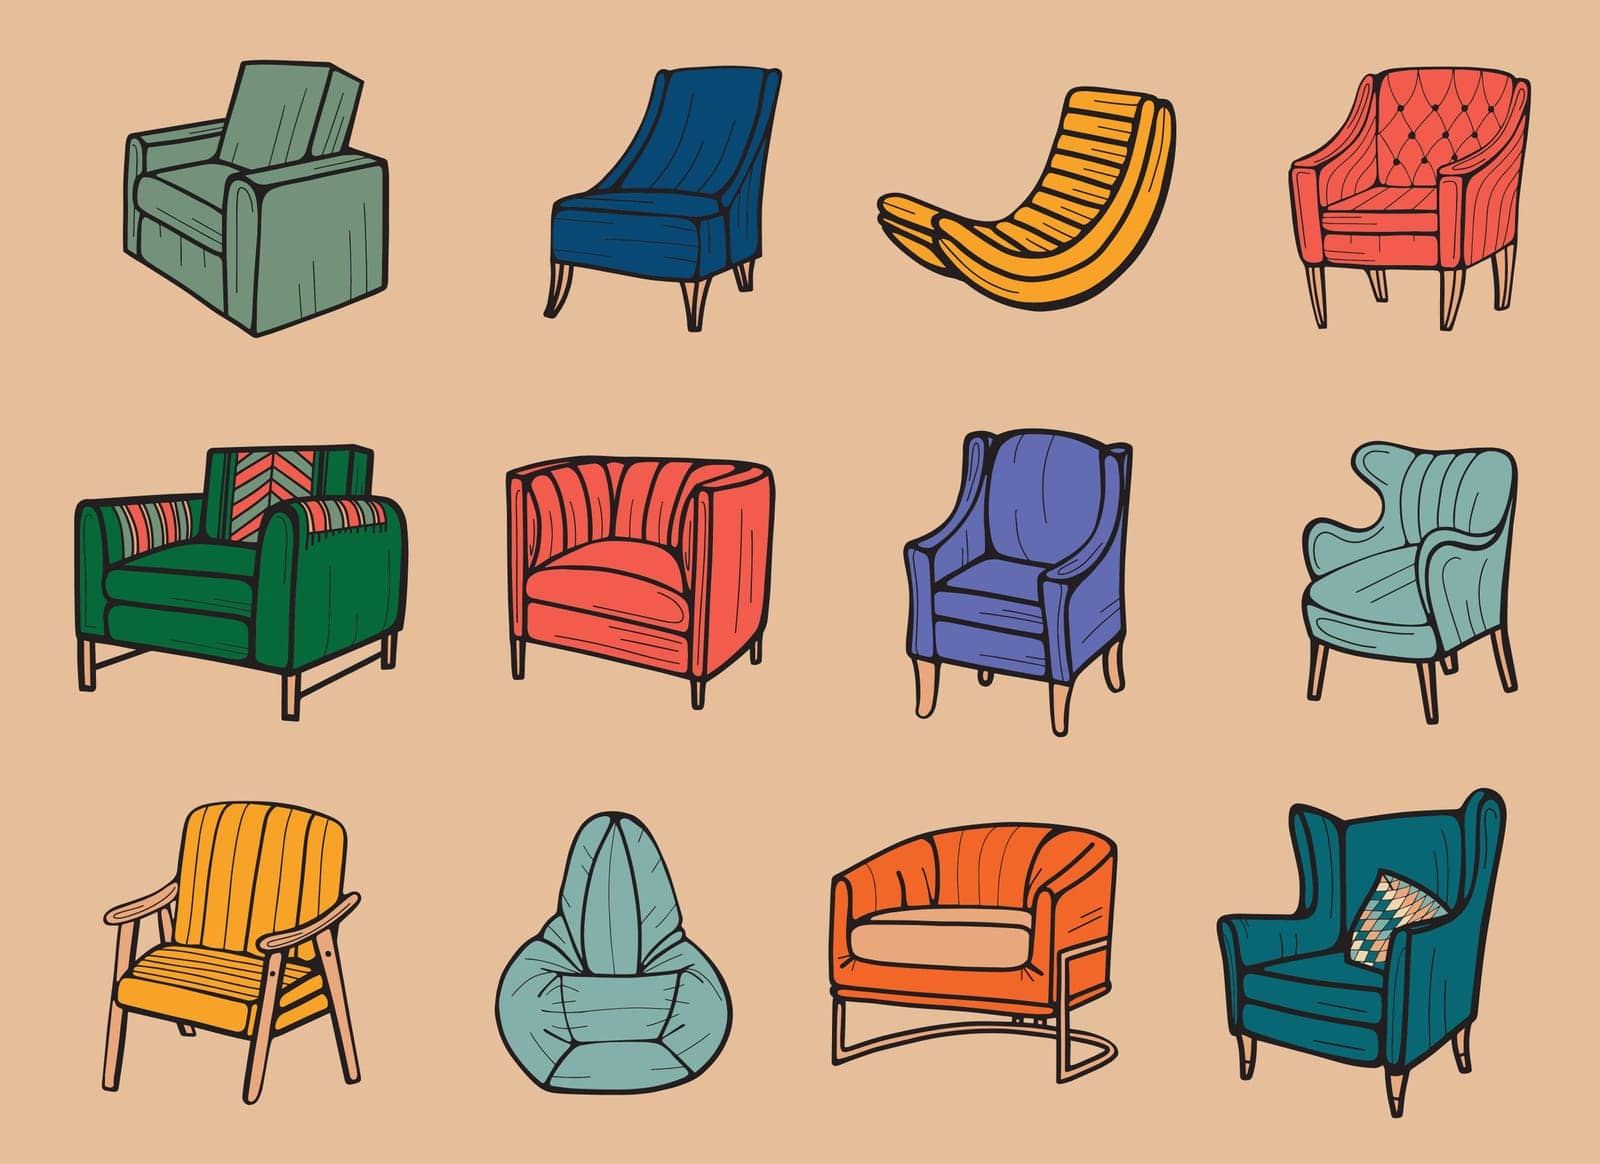 Armchair hand drawn vector illustration in doodle style by Dustick